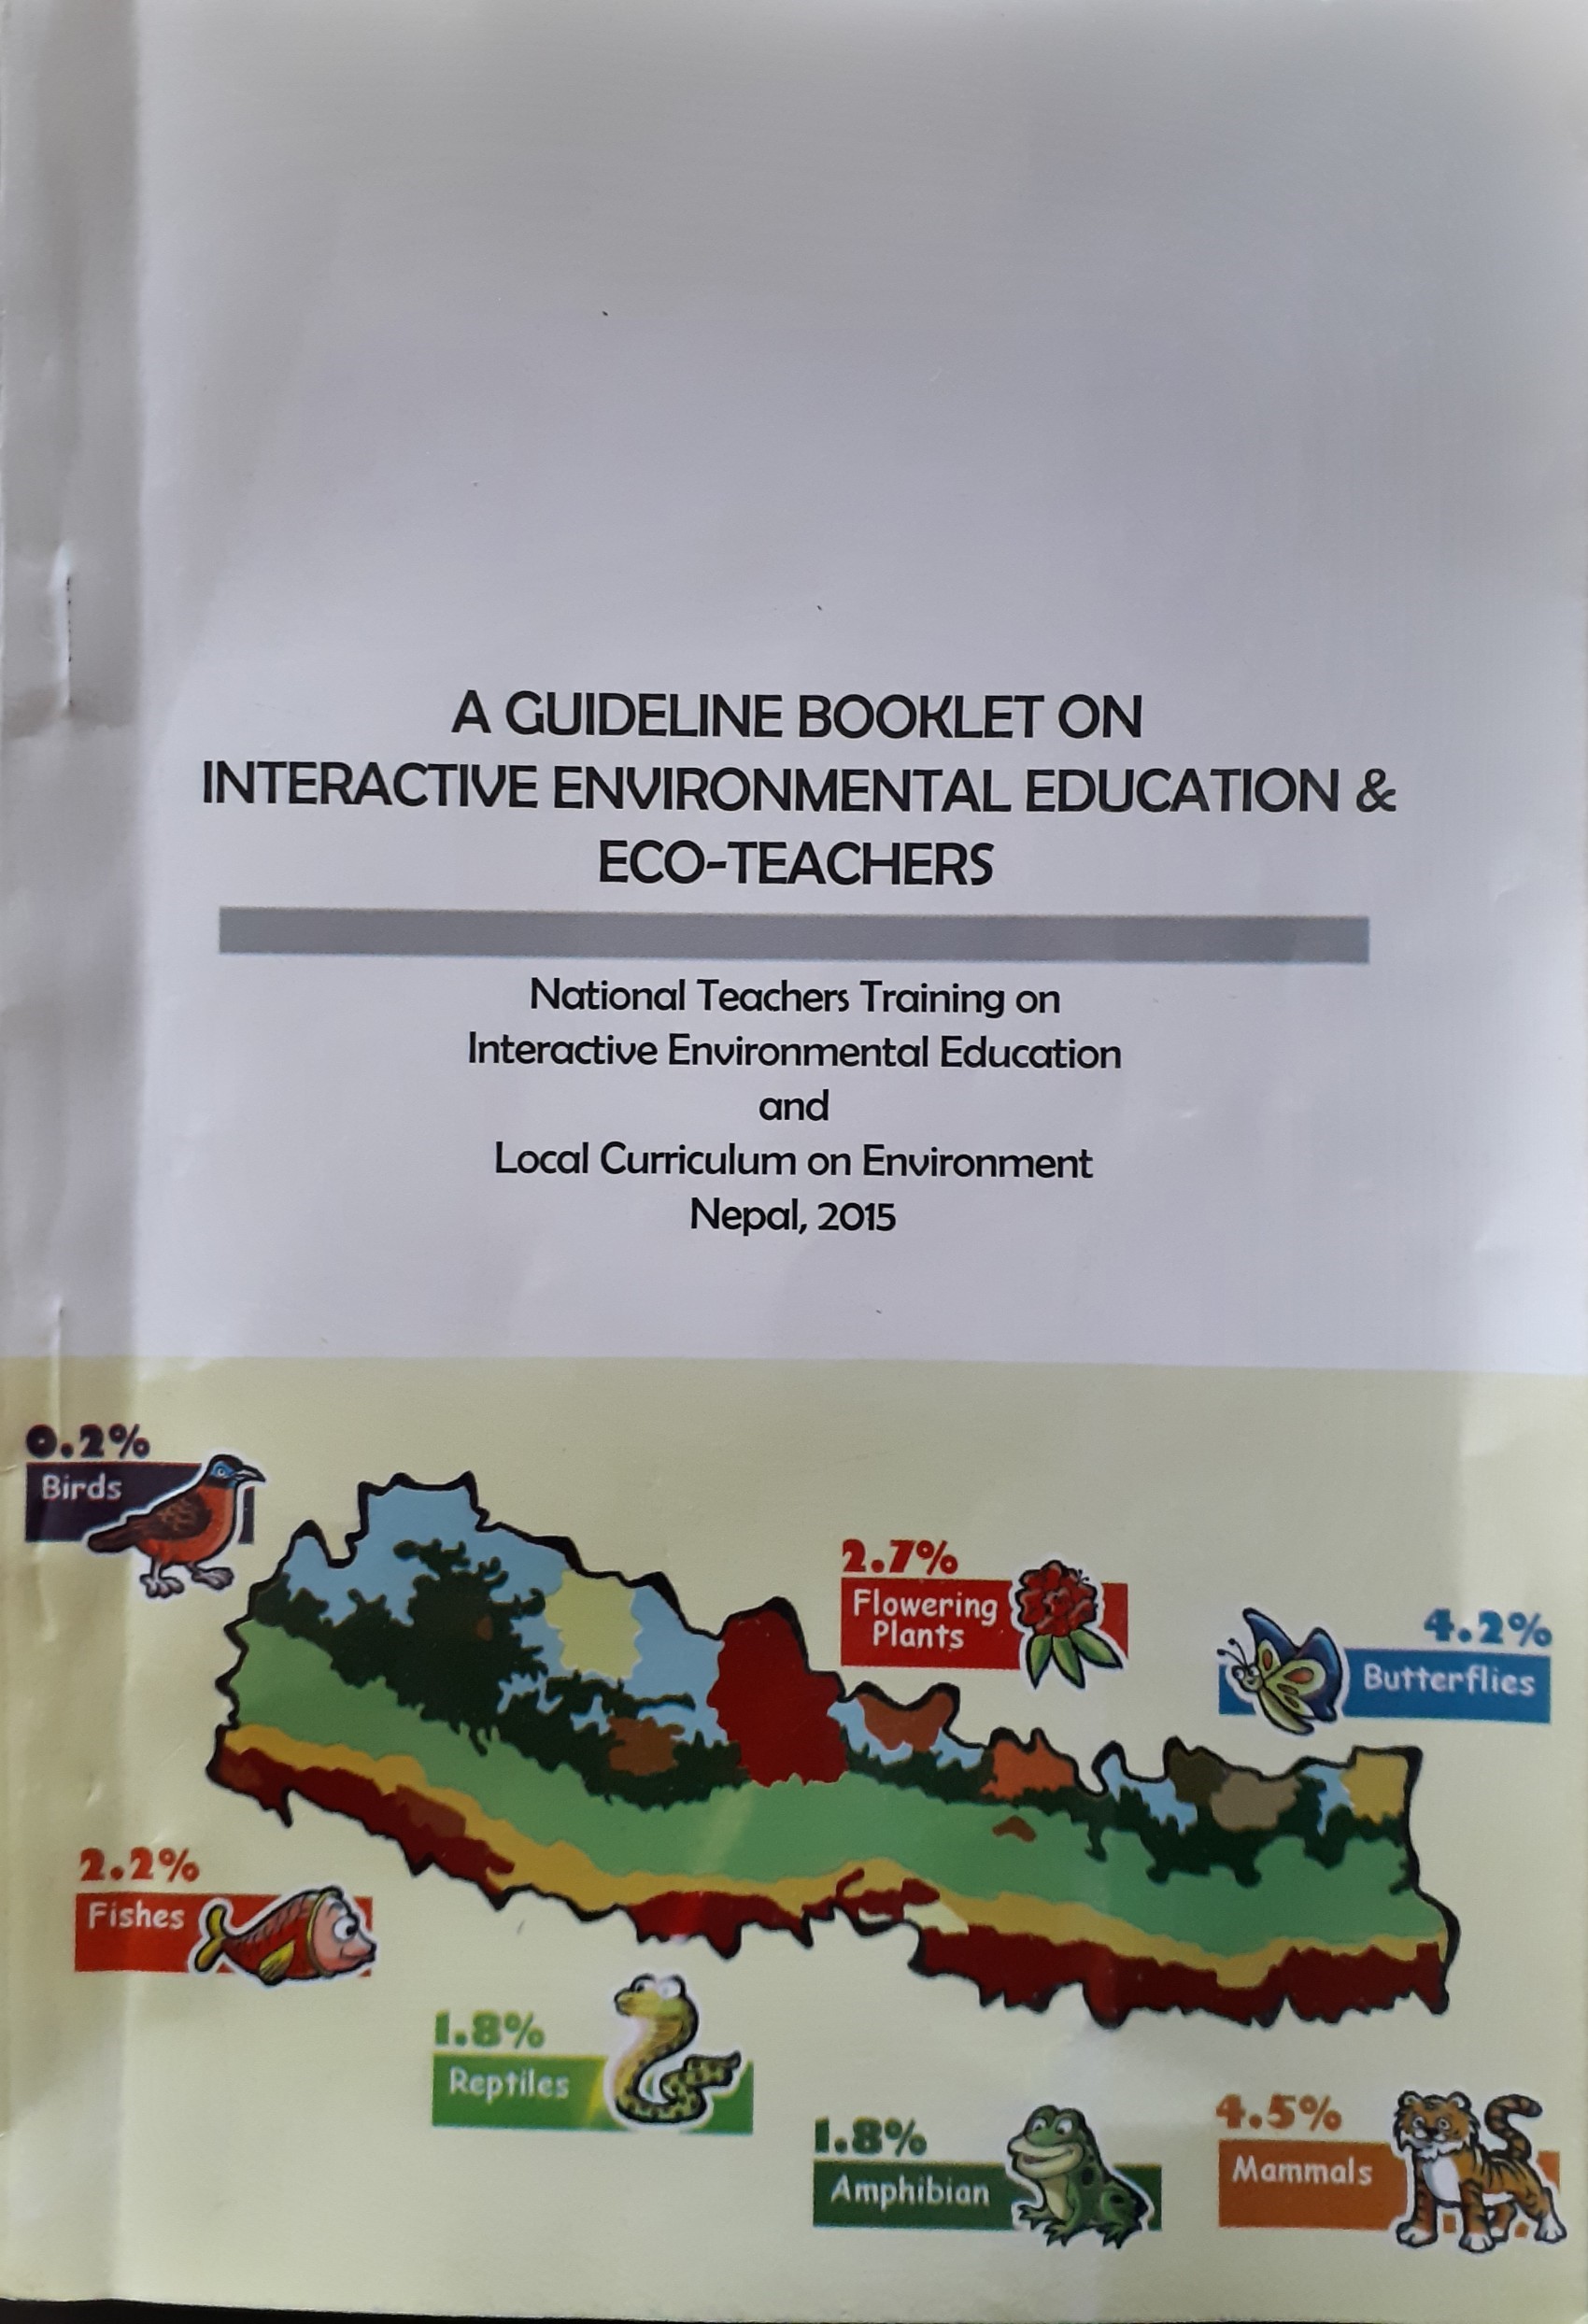 A Guideline Booklet on Interactive Environmental Education & Eco-Teachers